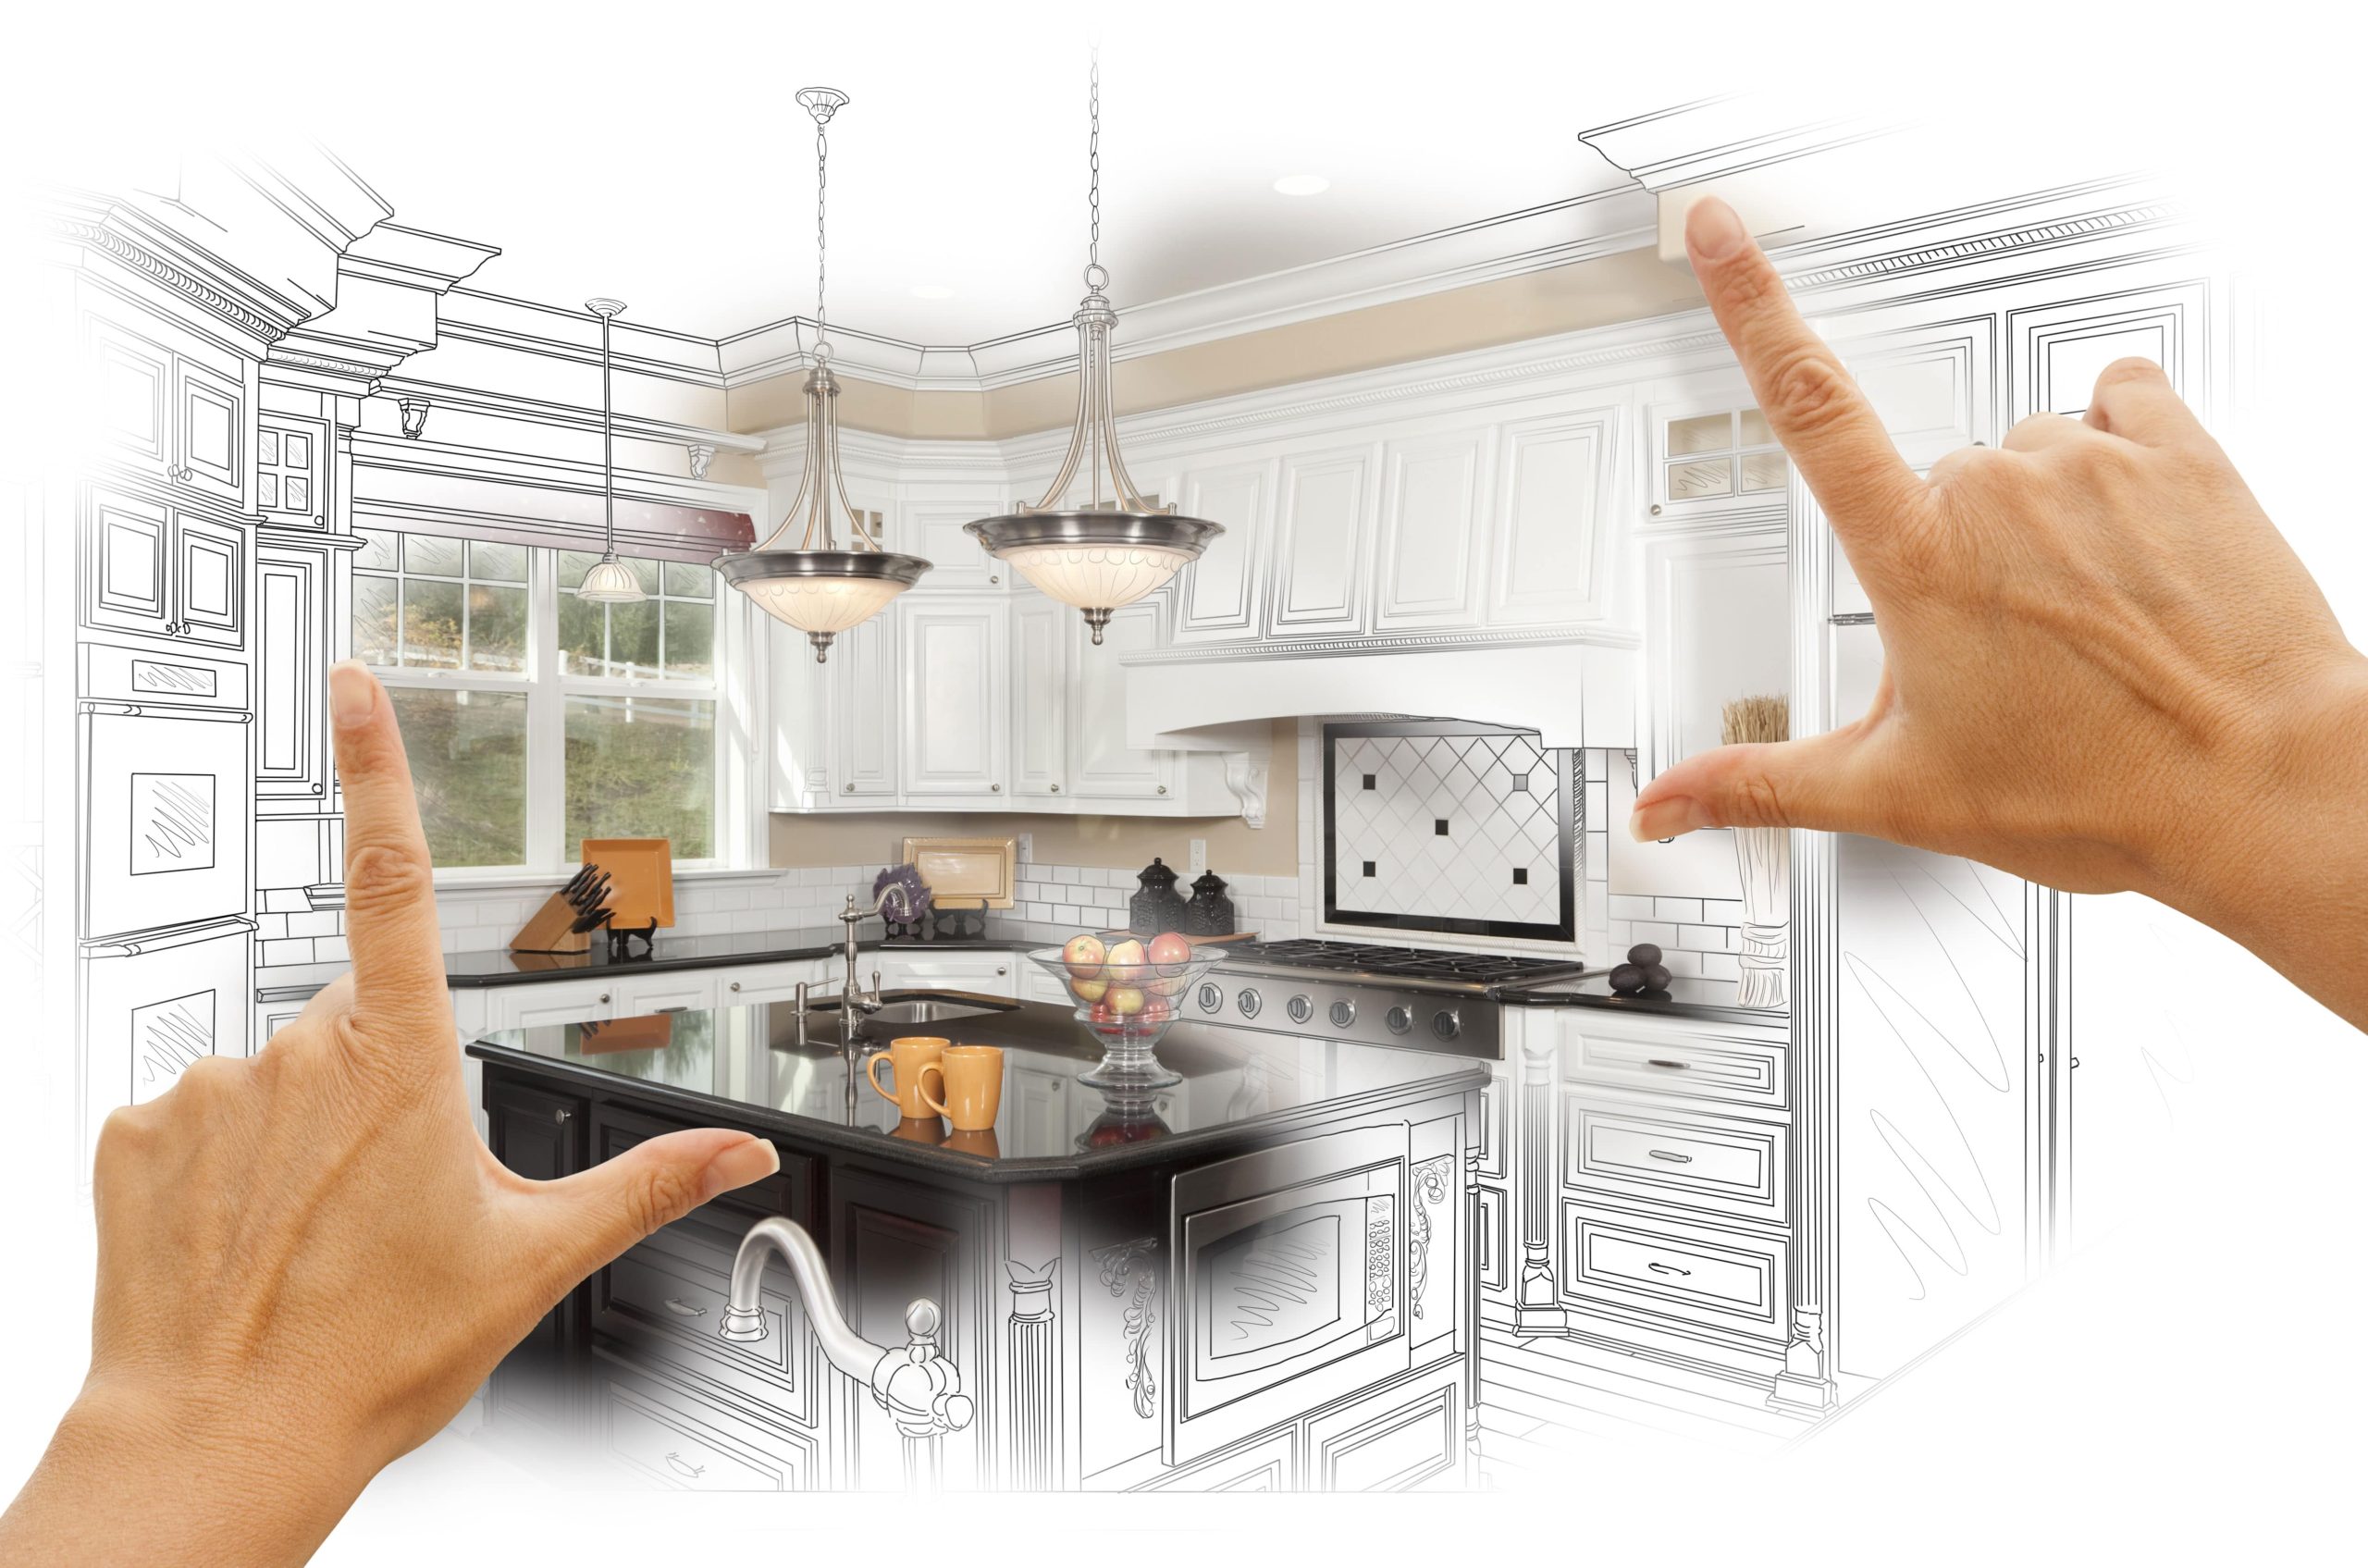 Our specialists in Modesto, California help you create a kitchen that reflects your personal style and design.